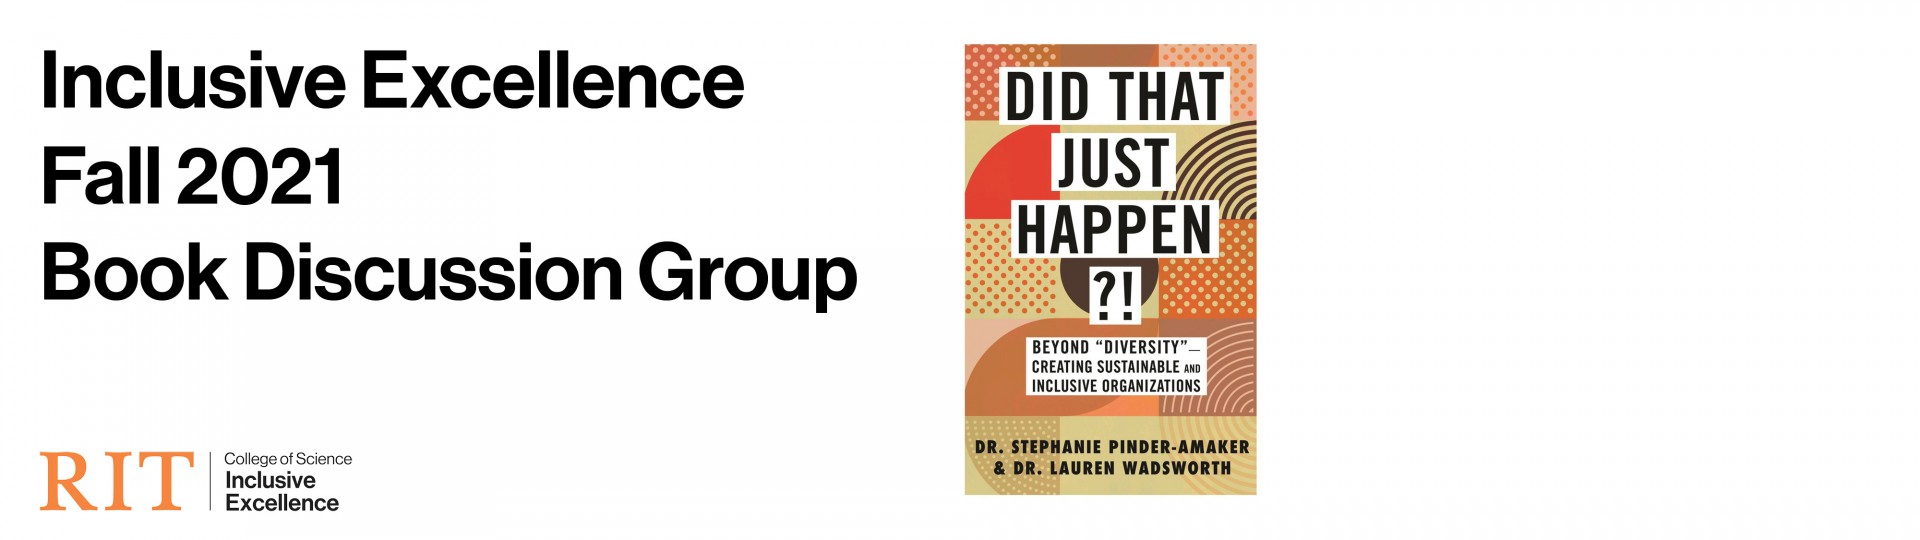 inclusive excellence fall 2021 book discussion group